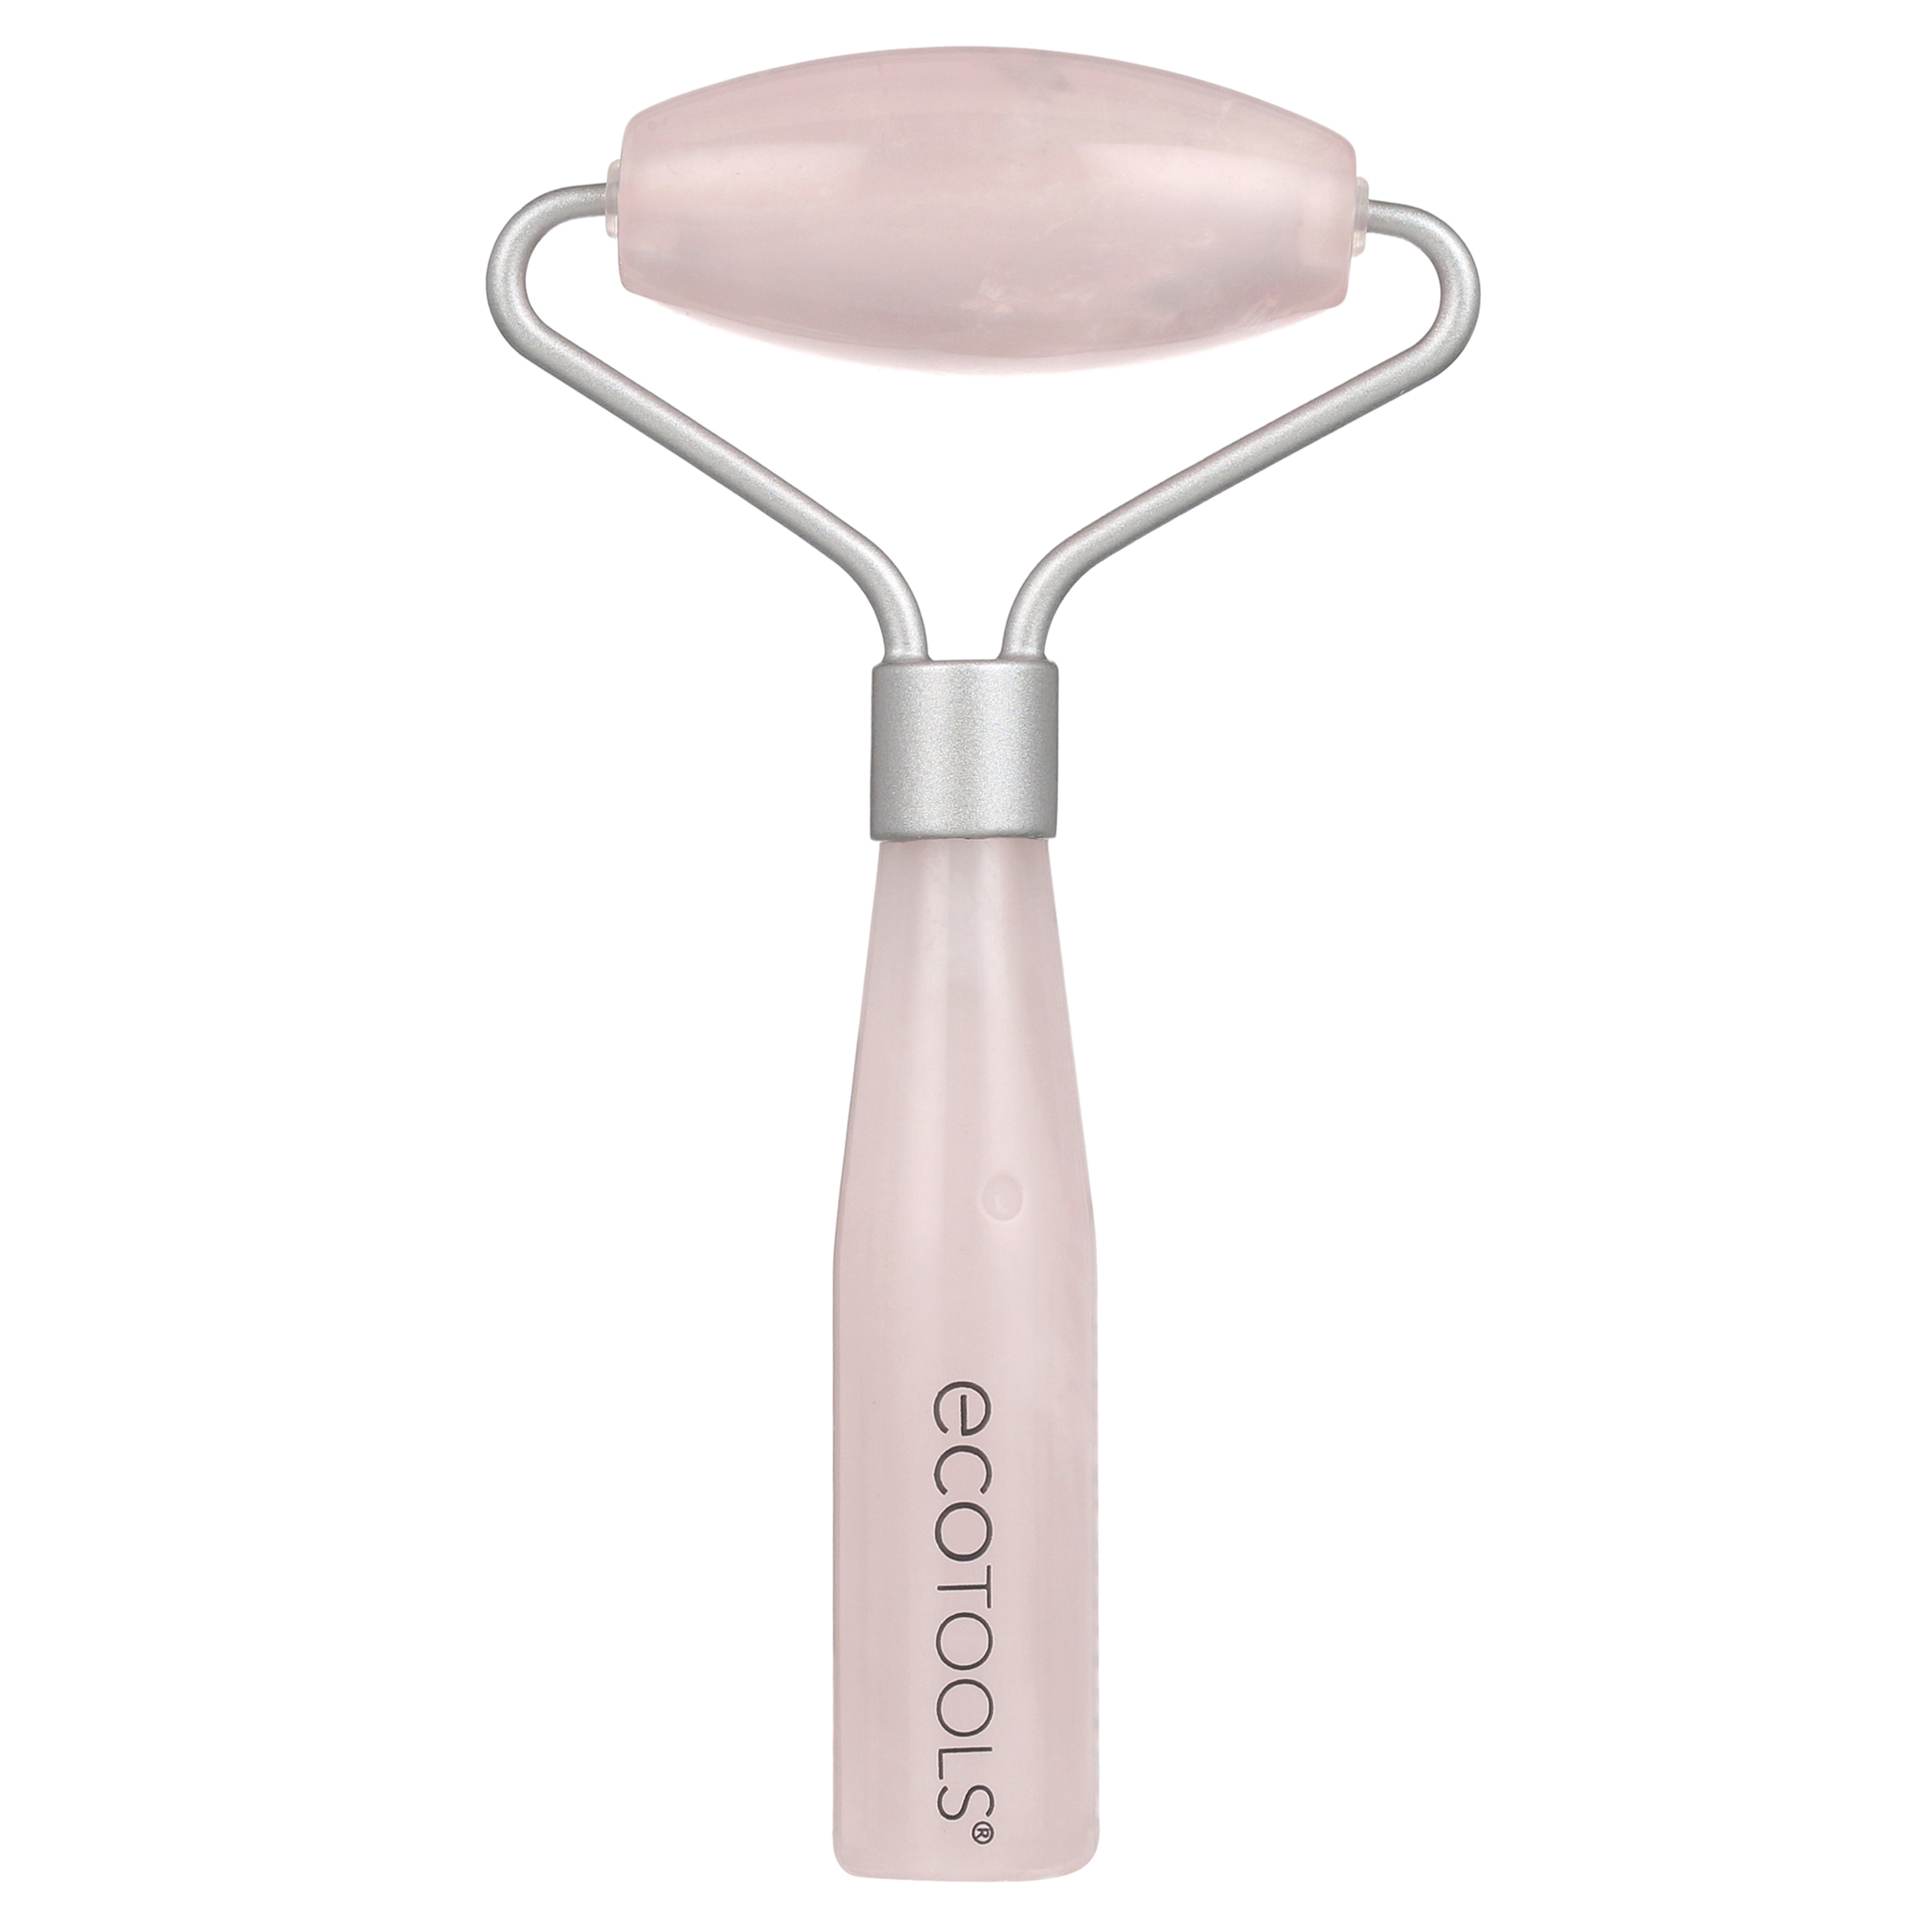 EcoTools Mini Rose Quartz Facial Roller and Massage Roller, Skincare and Sculpting Tool,1 Count - image 1 of 9